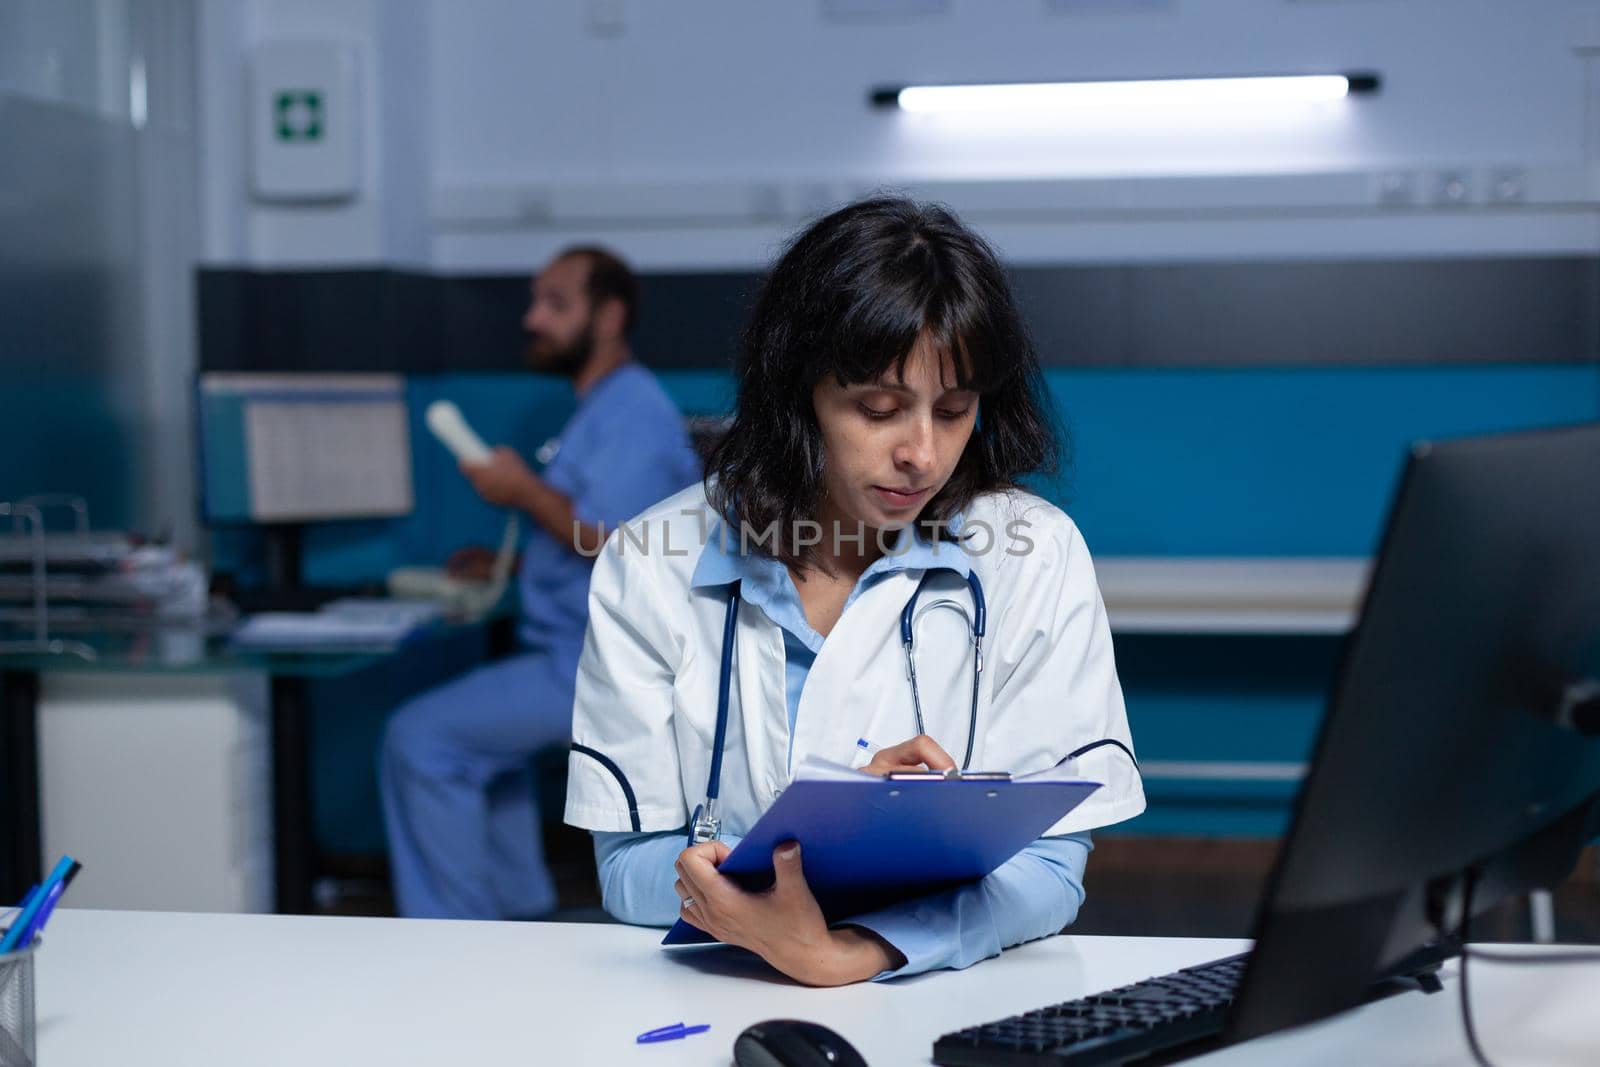 Professional medic looking at computer screen and medical files by DCStudio